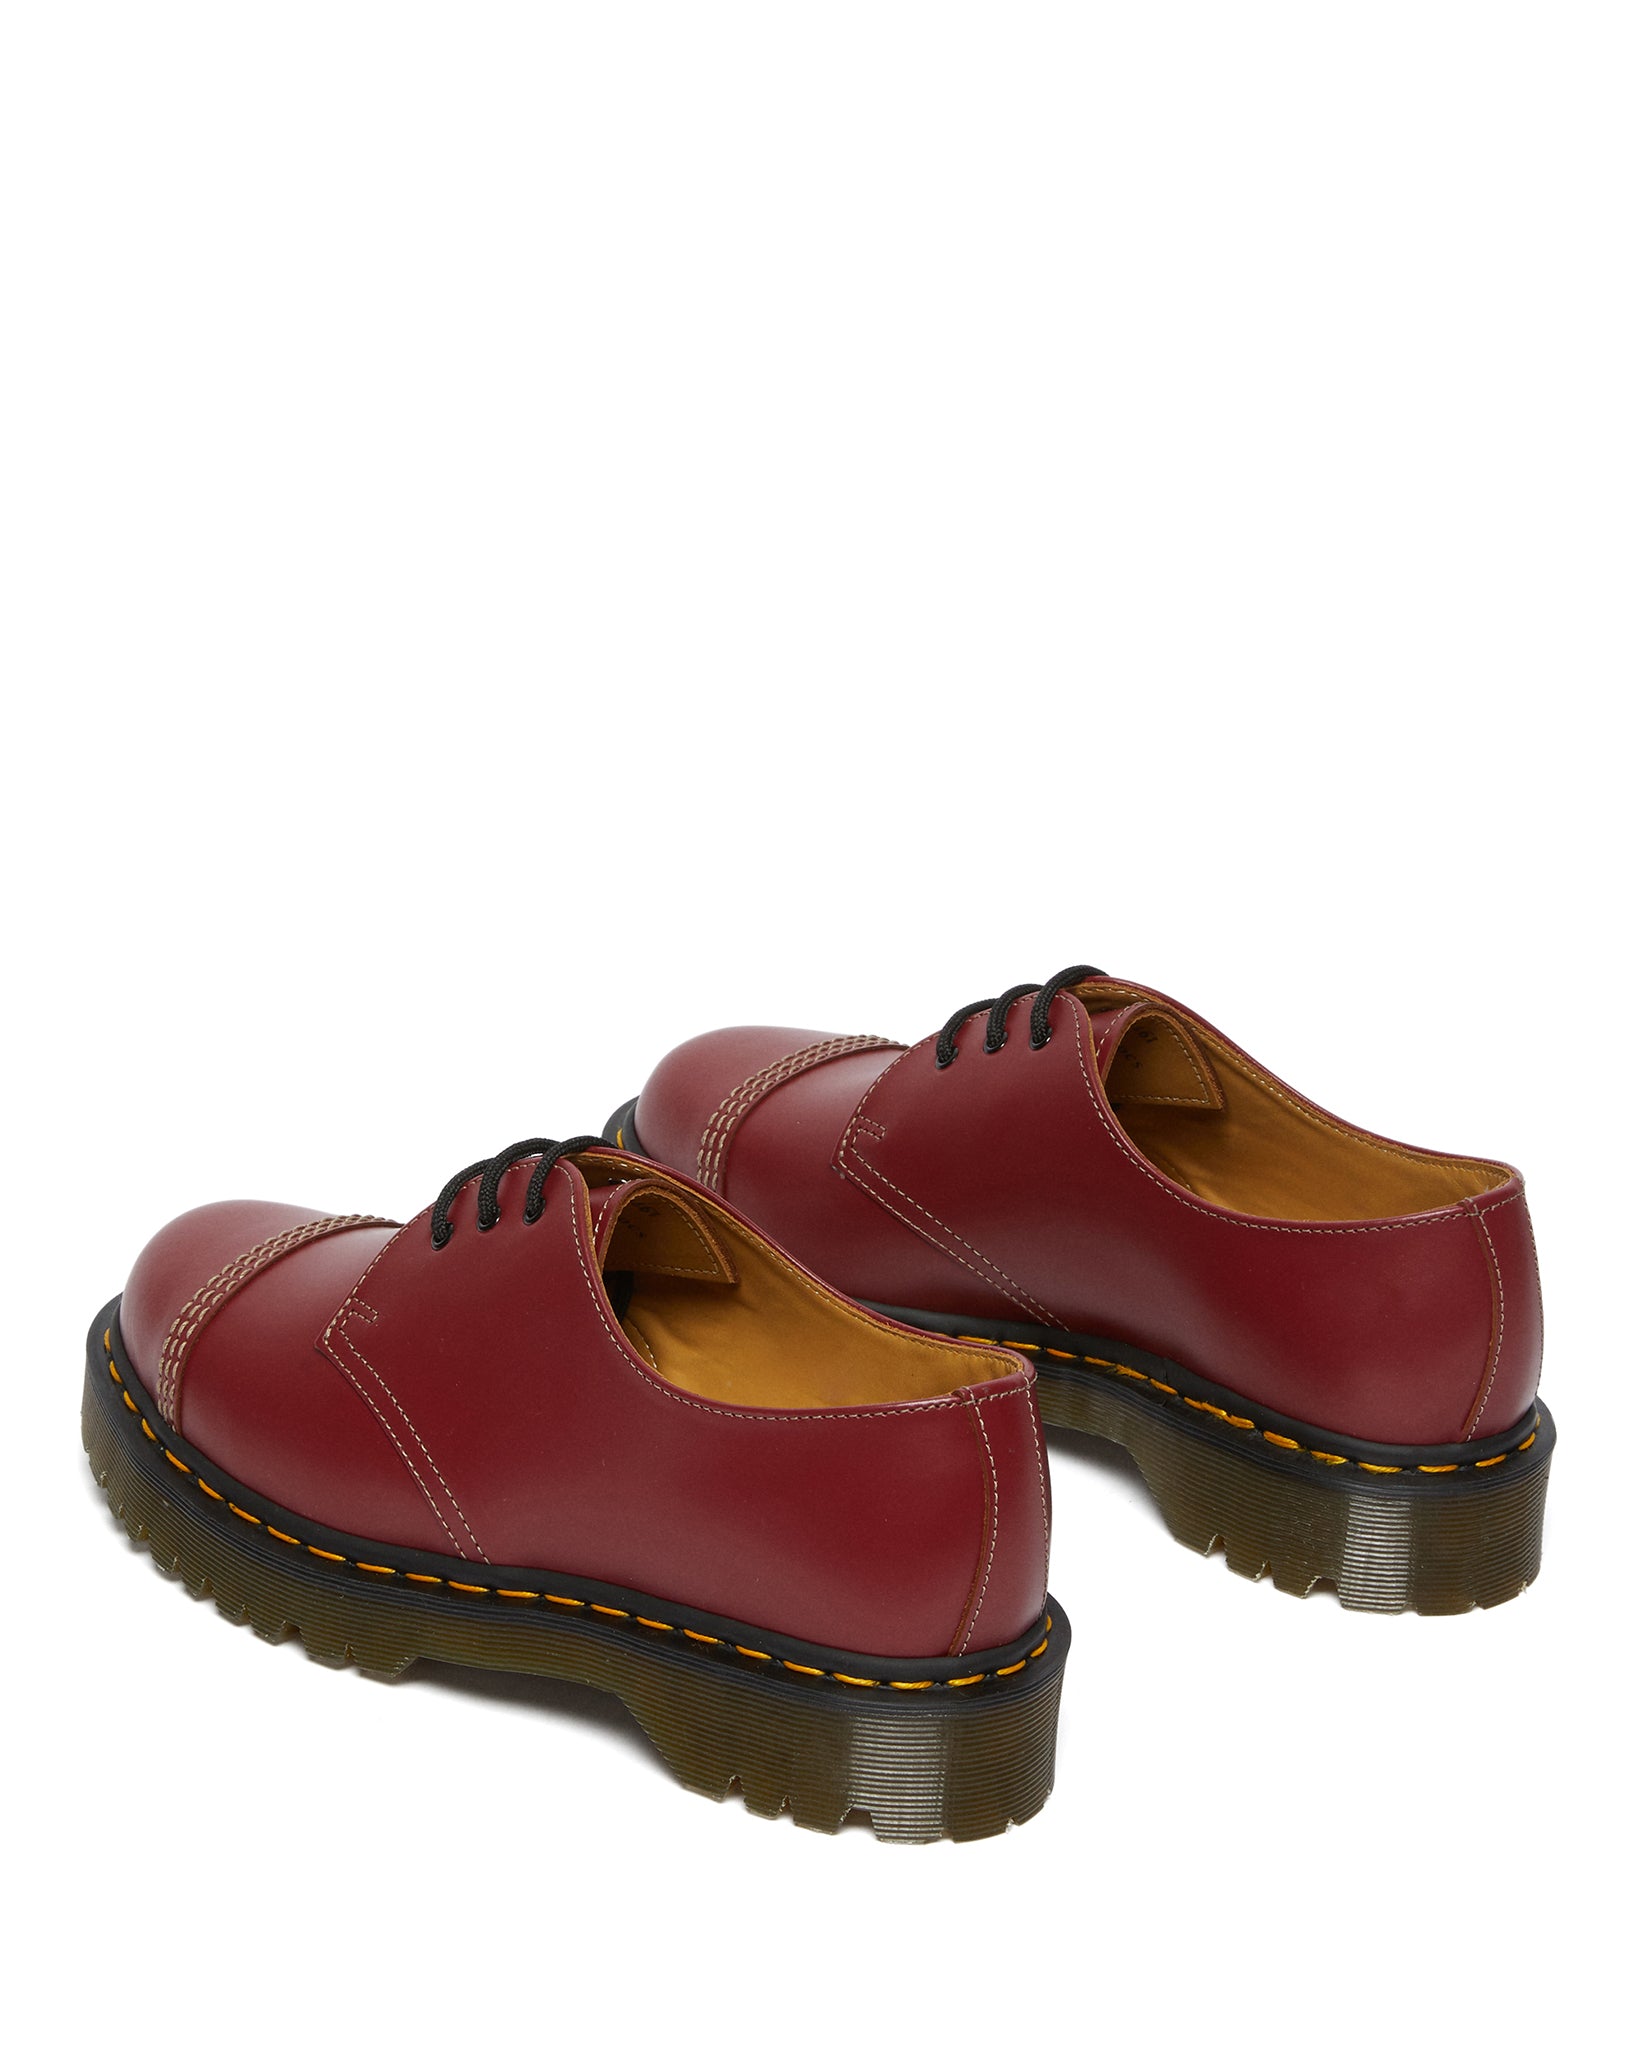 Made in England 1461 Bex Toe Cap Oxblood Quilon Leather Shoes